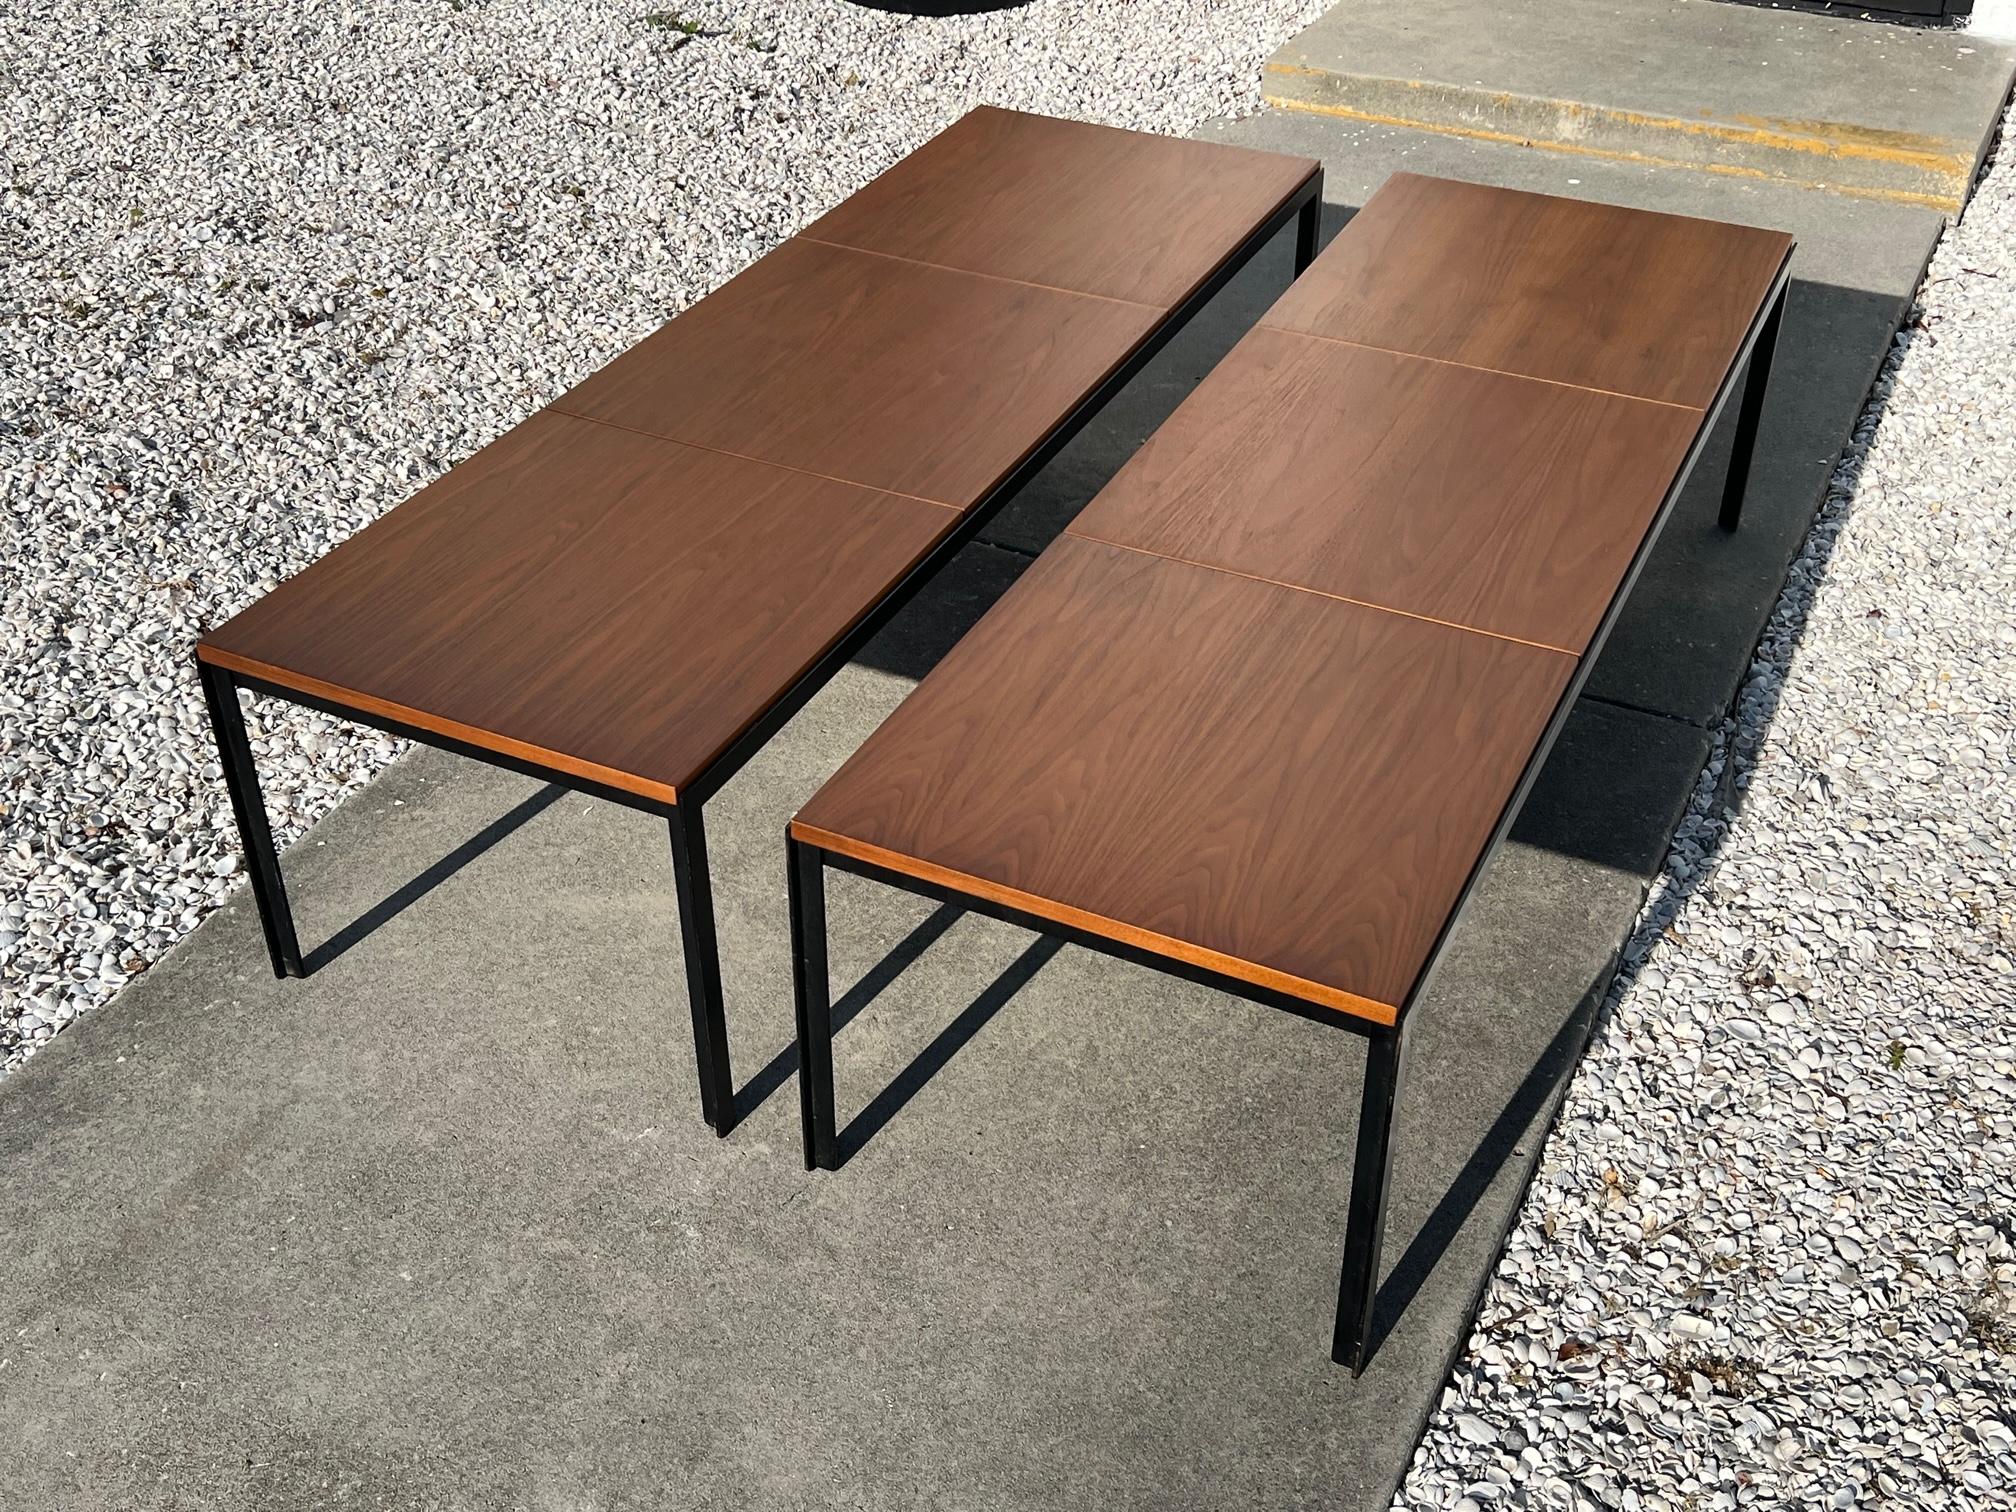 Wrought Iron A Pair Of Florence Knoll Angle Iron Tables Or Benches In Walnut For Sale